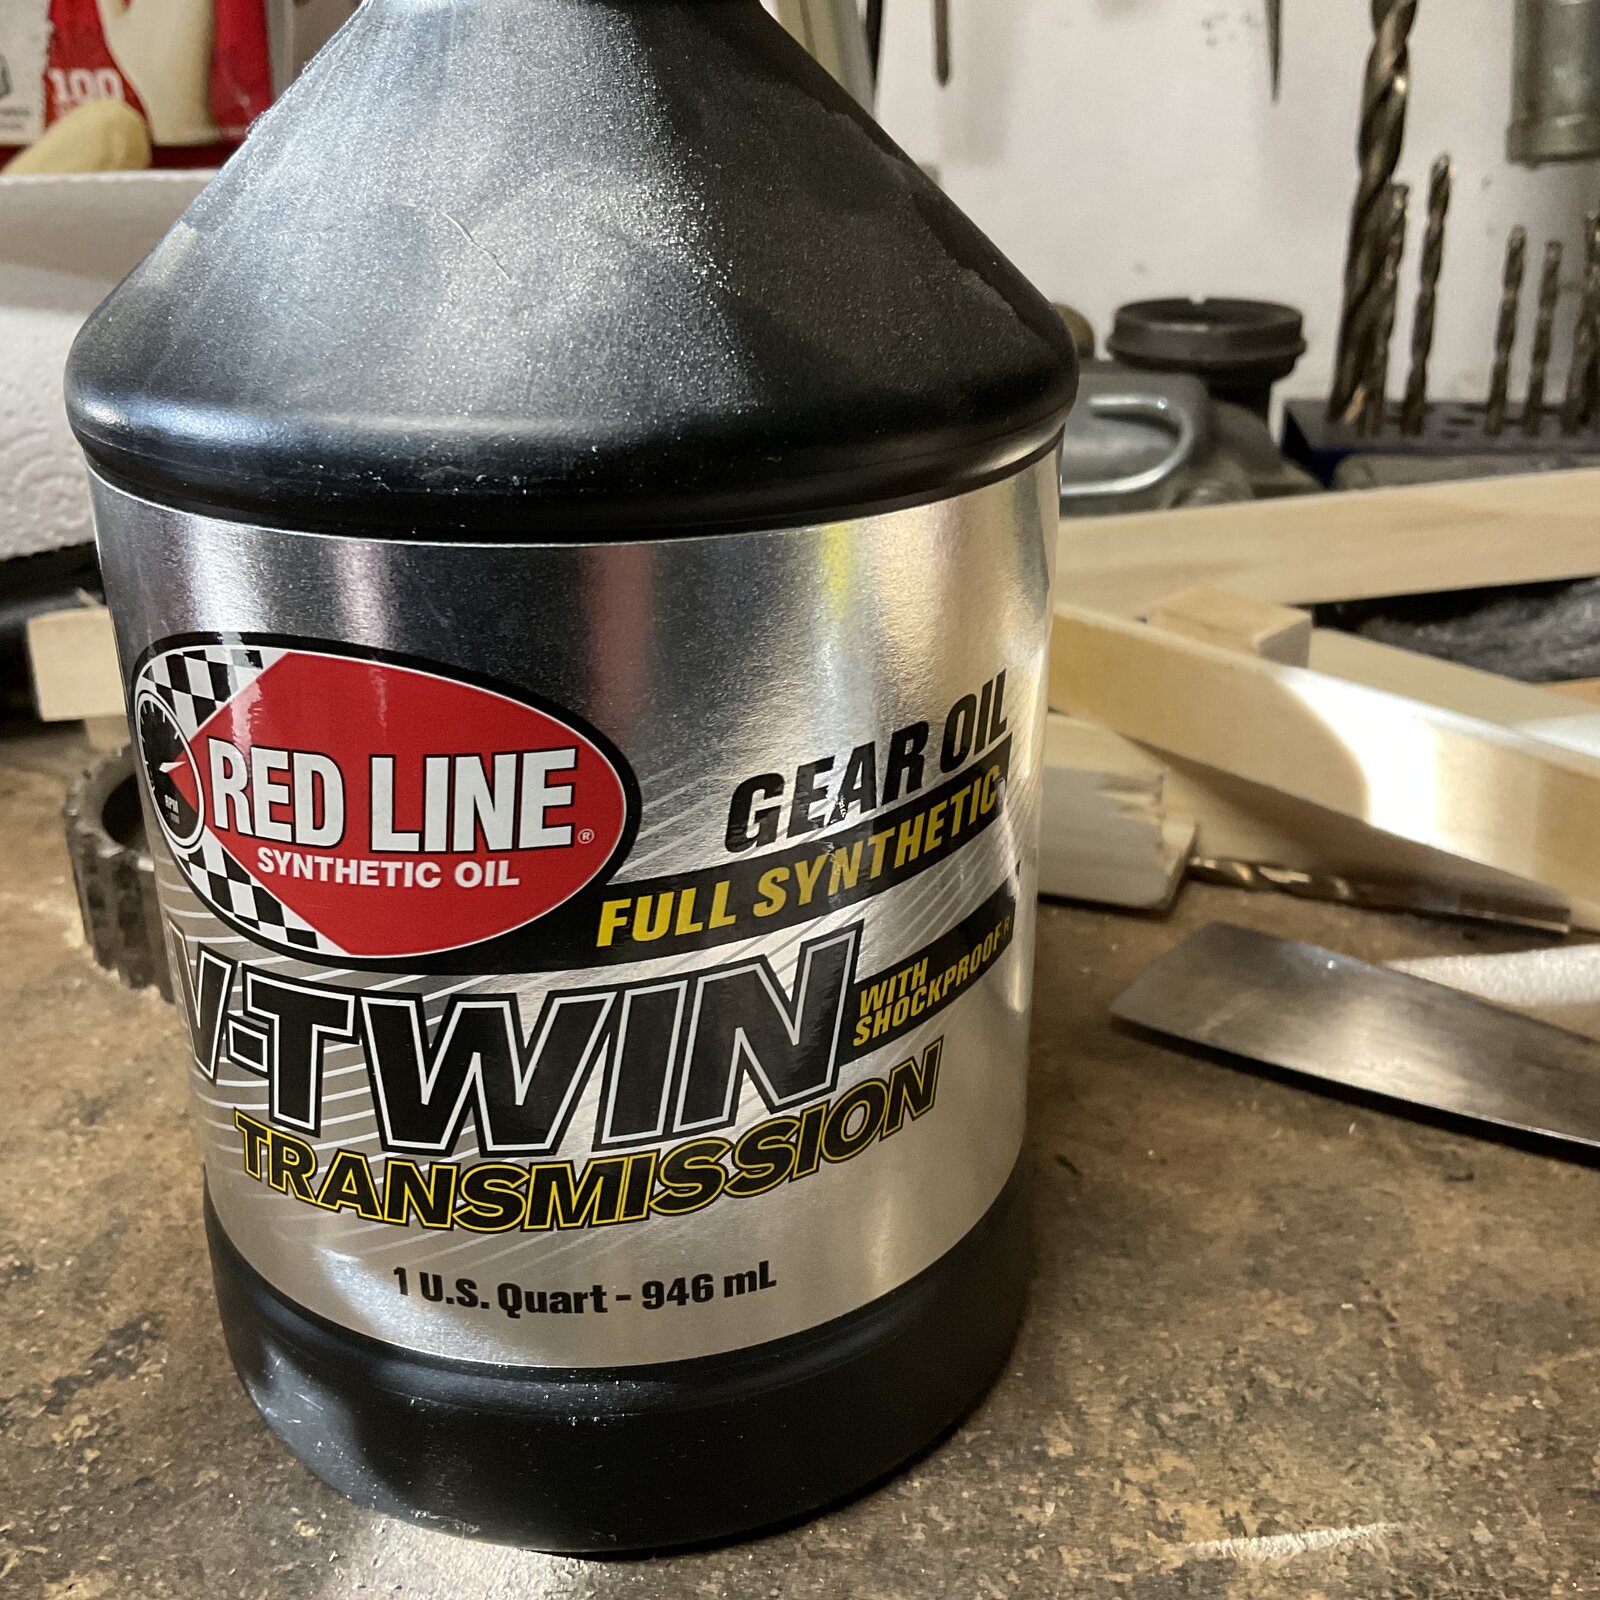 Red Line Synthetic Oil. Chain Lube with ShockProof